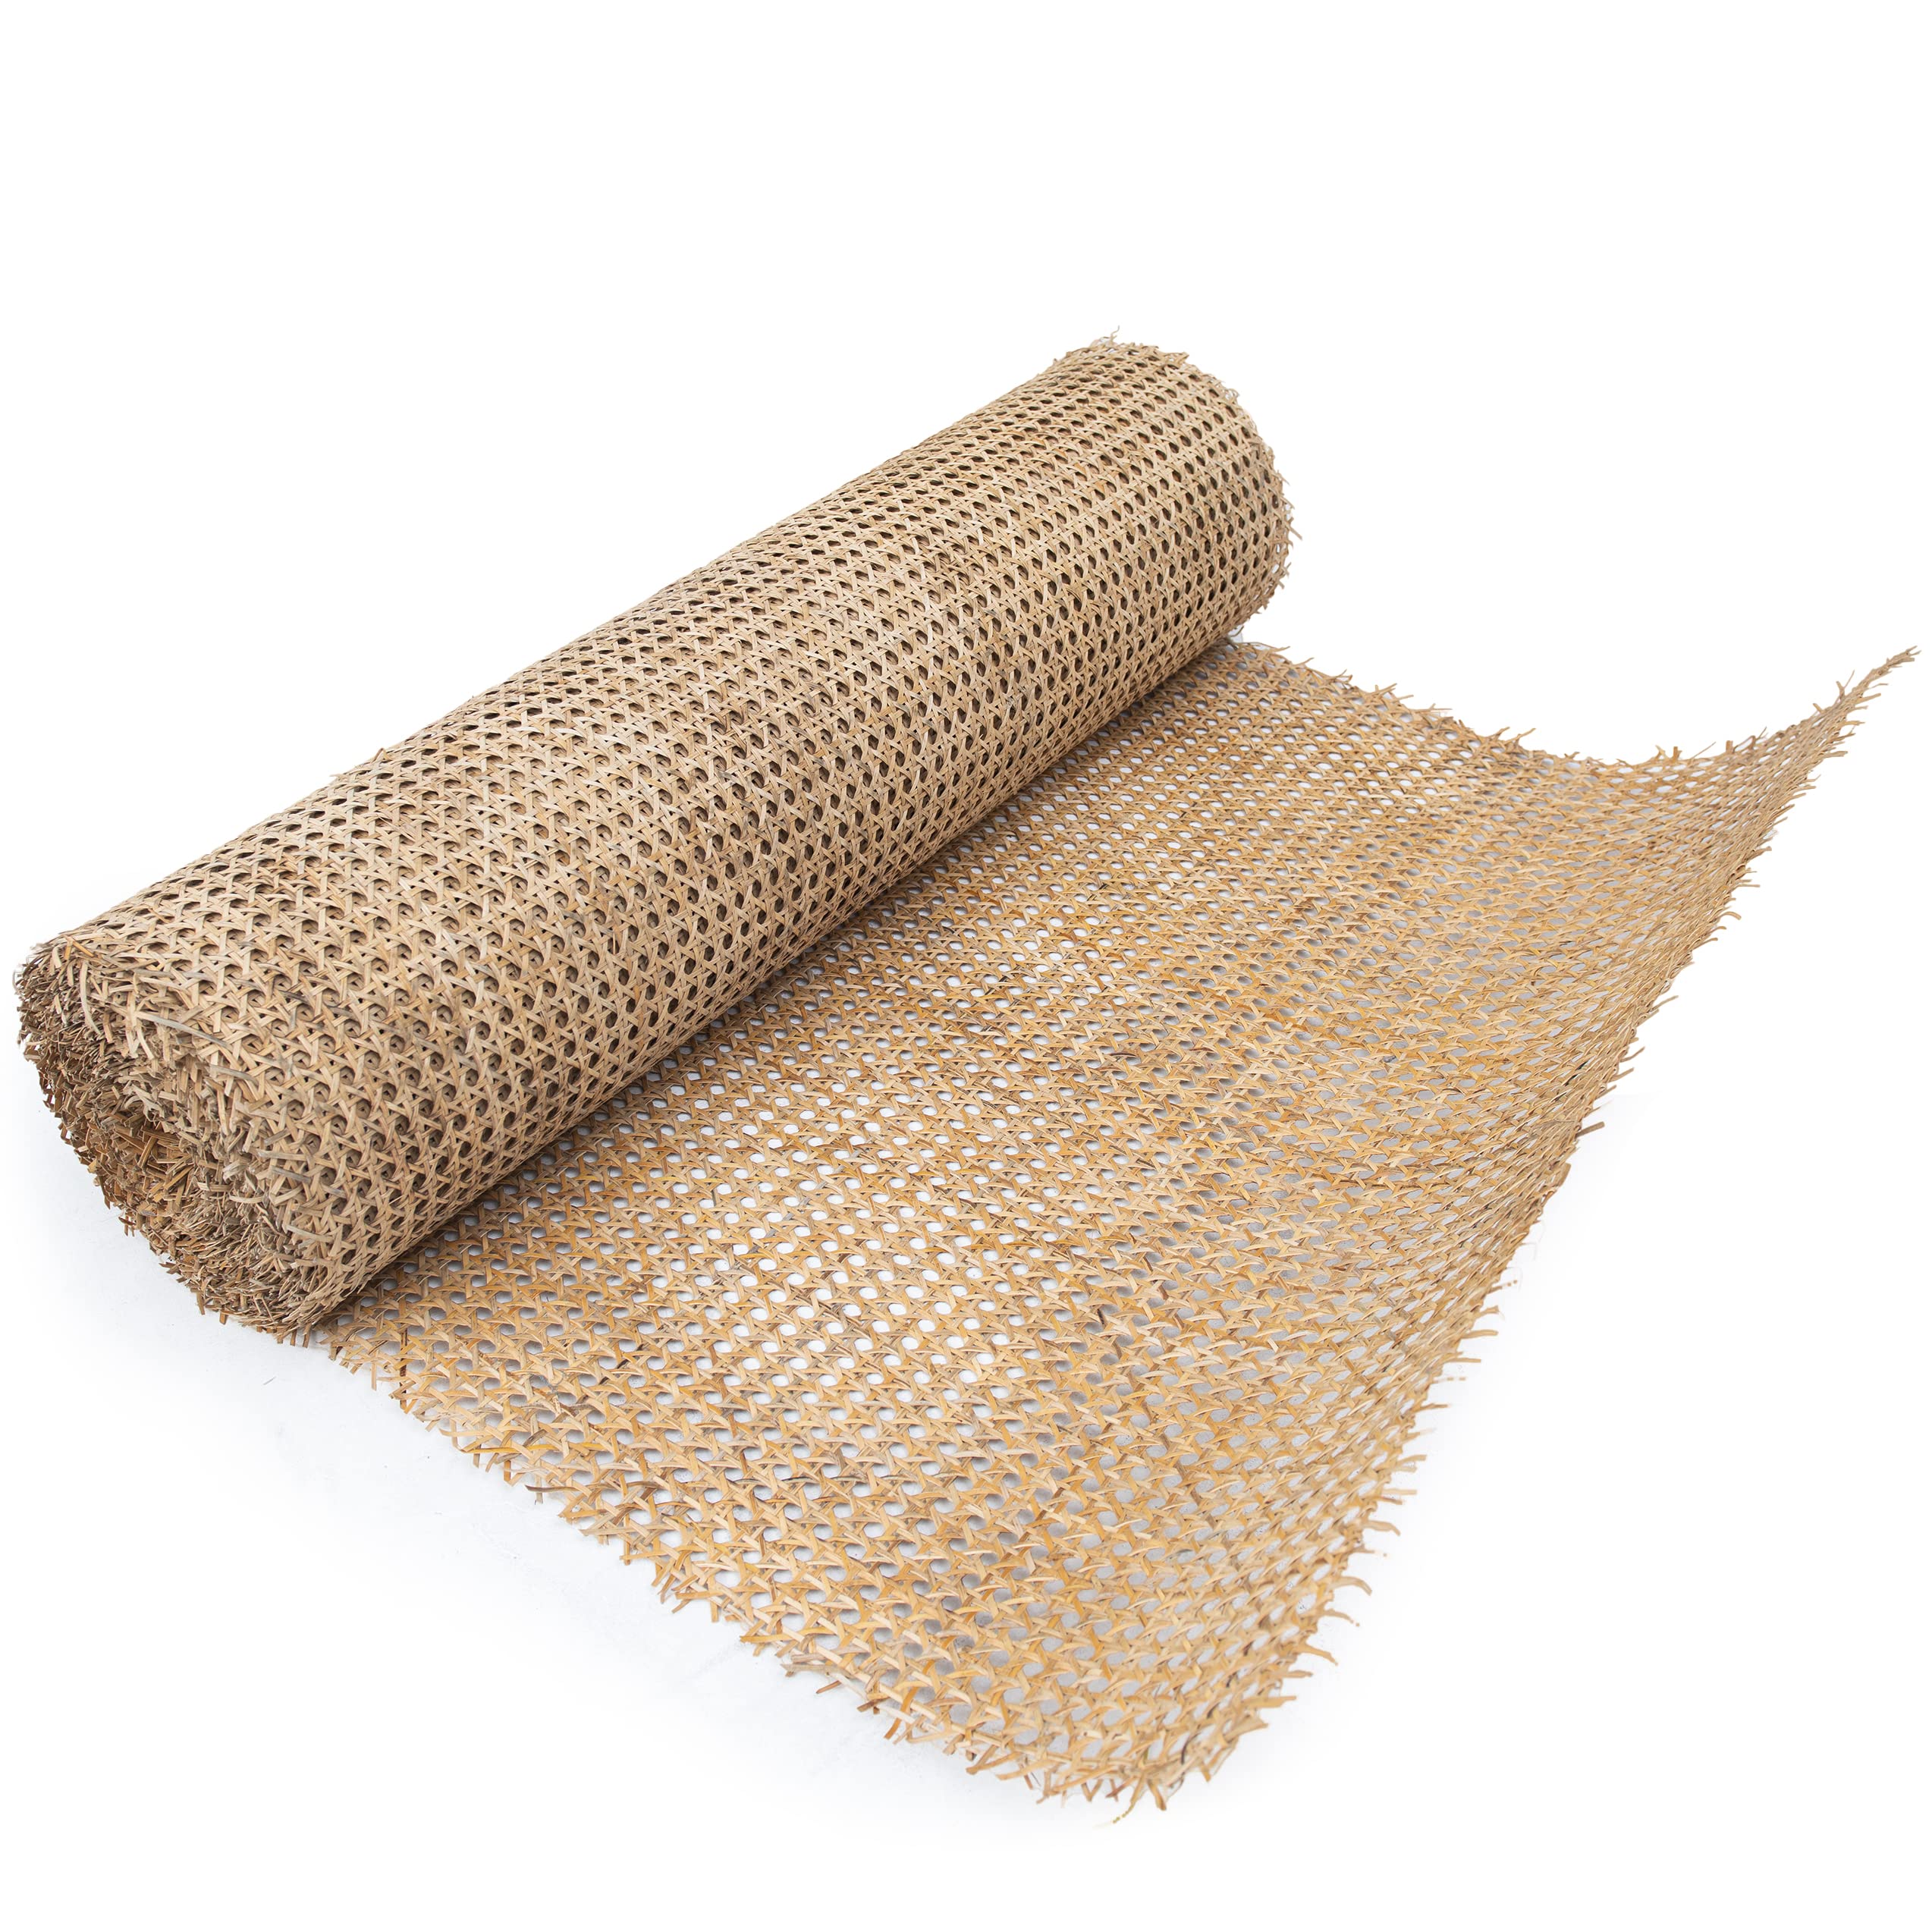 36 Width Natural Rattan Webbing for Caning Projects  Pre - Woven Open Mesh  Cane - Cane Webbing Sheet- Natural Rattan Cane Webbing roll (3 FEET)